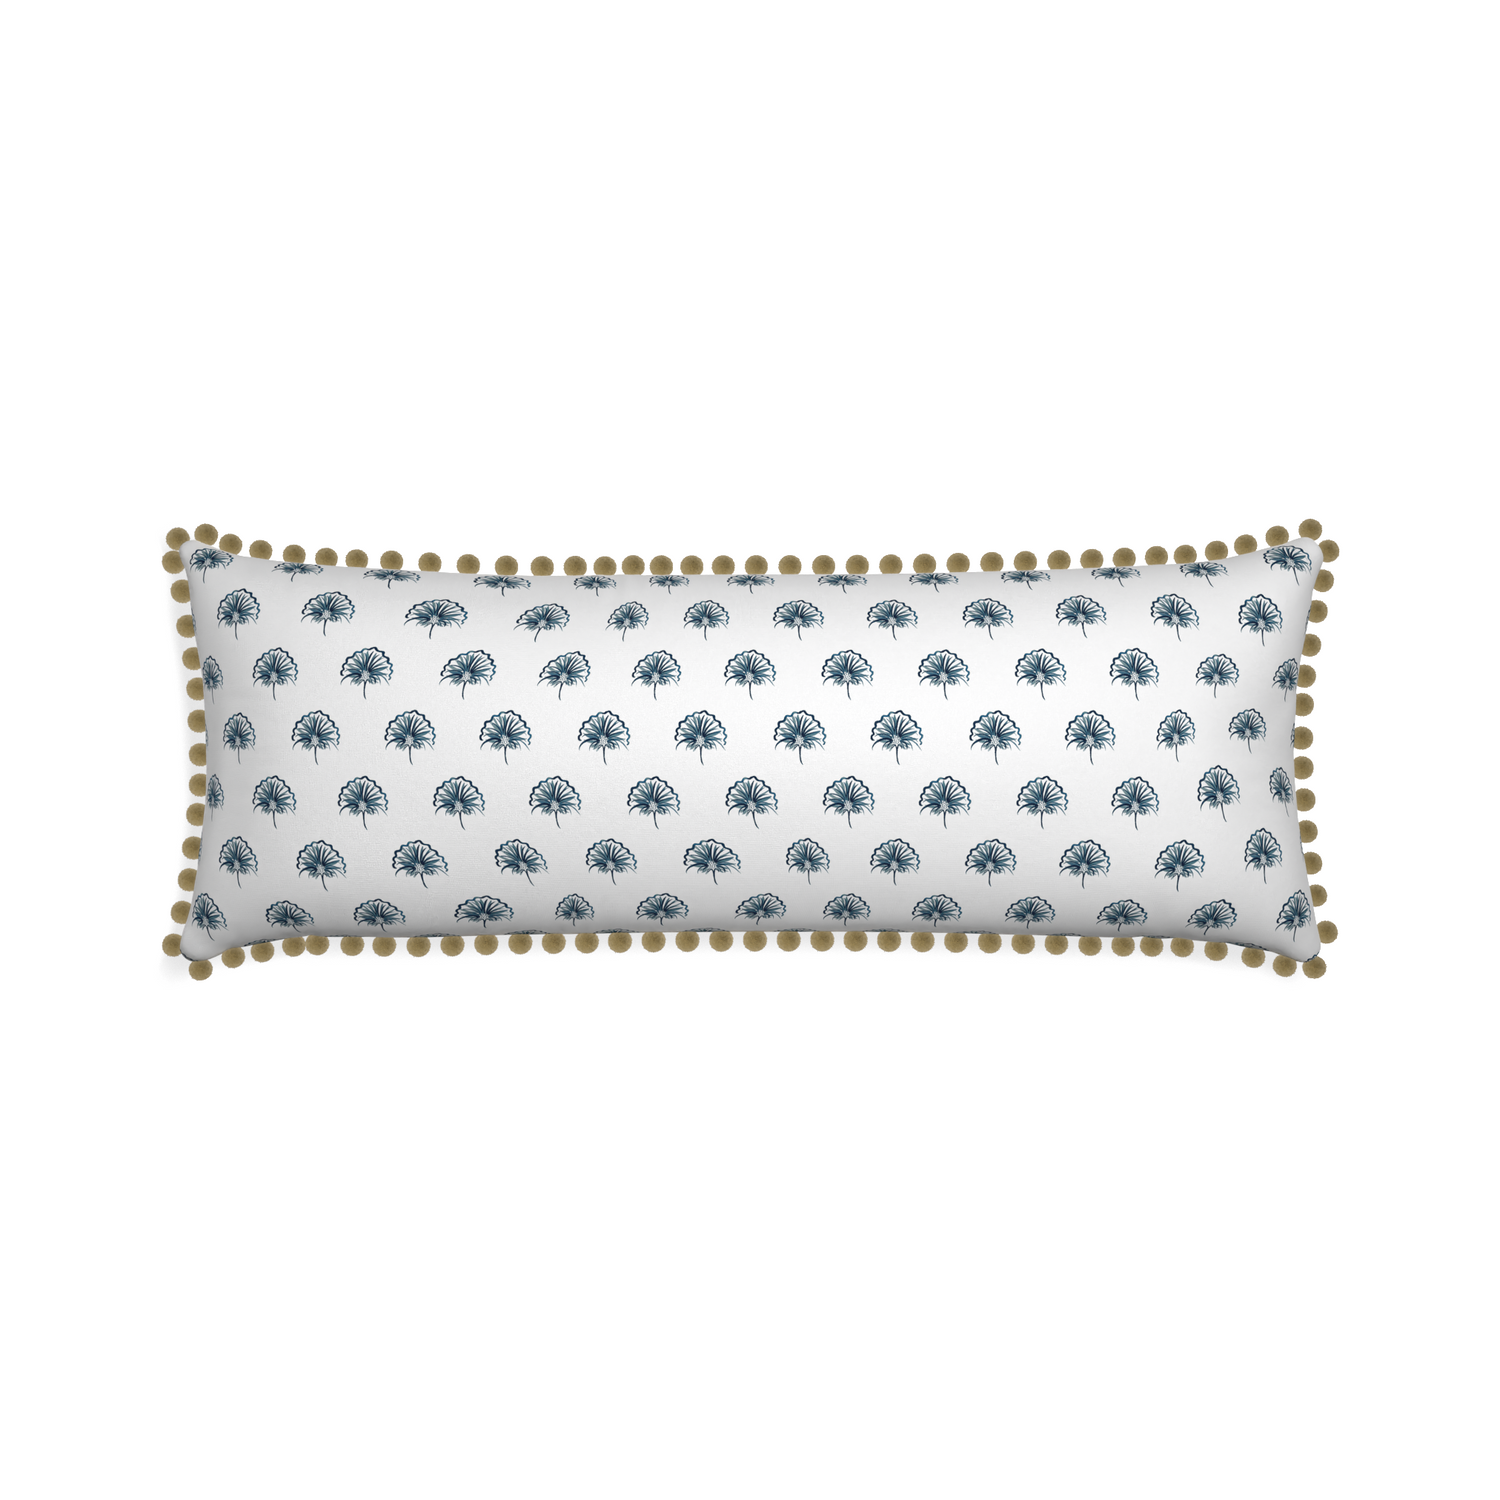 Xl-lumbar penelope midnight custom floral navypillow with olive pom pom on white background